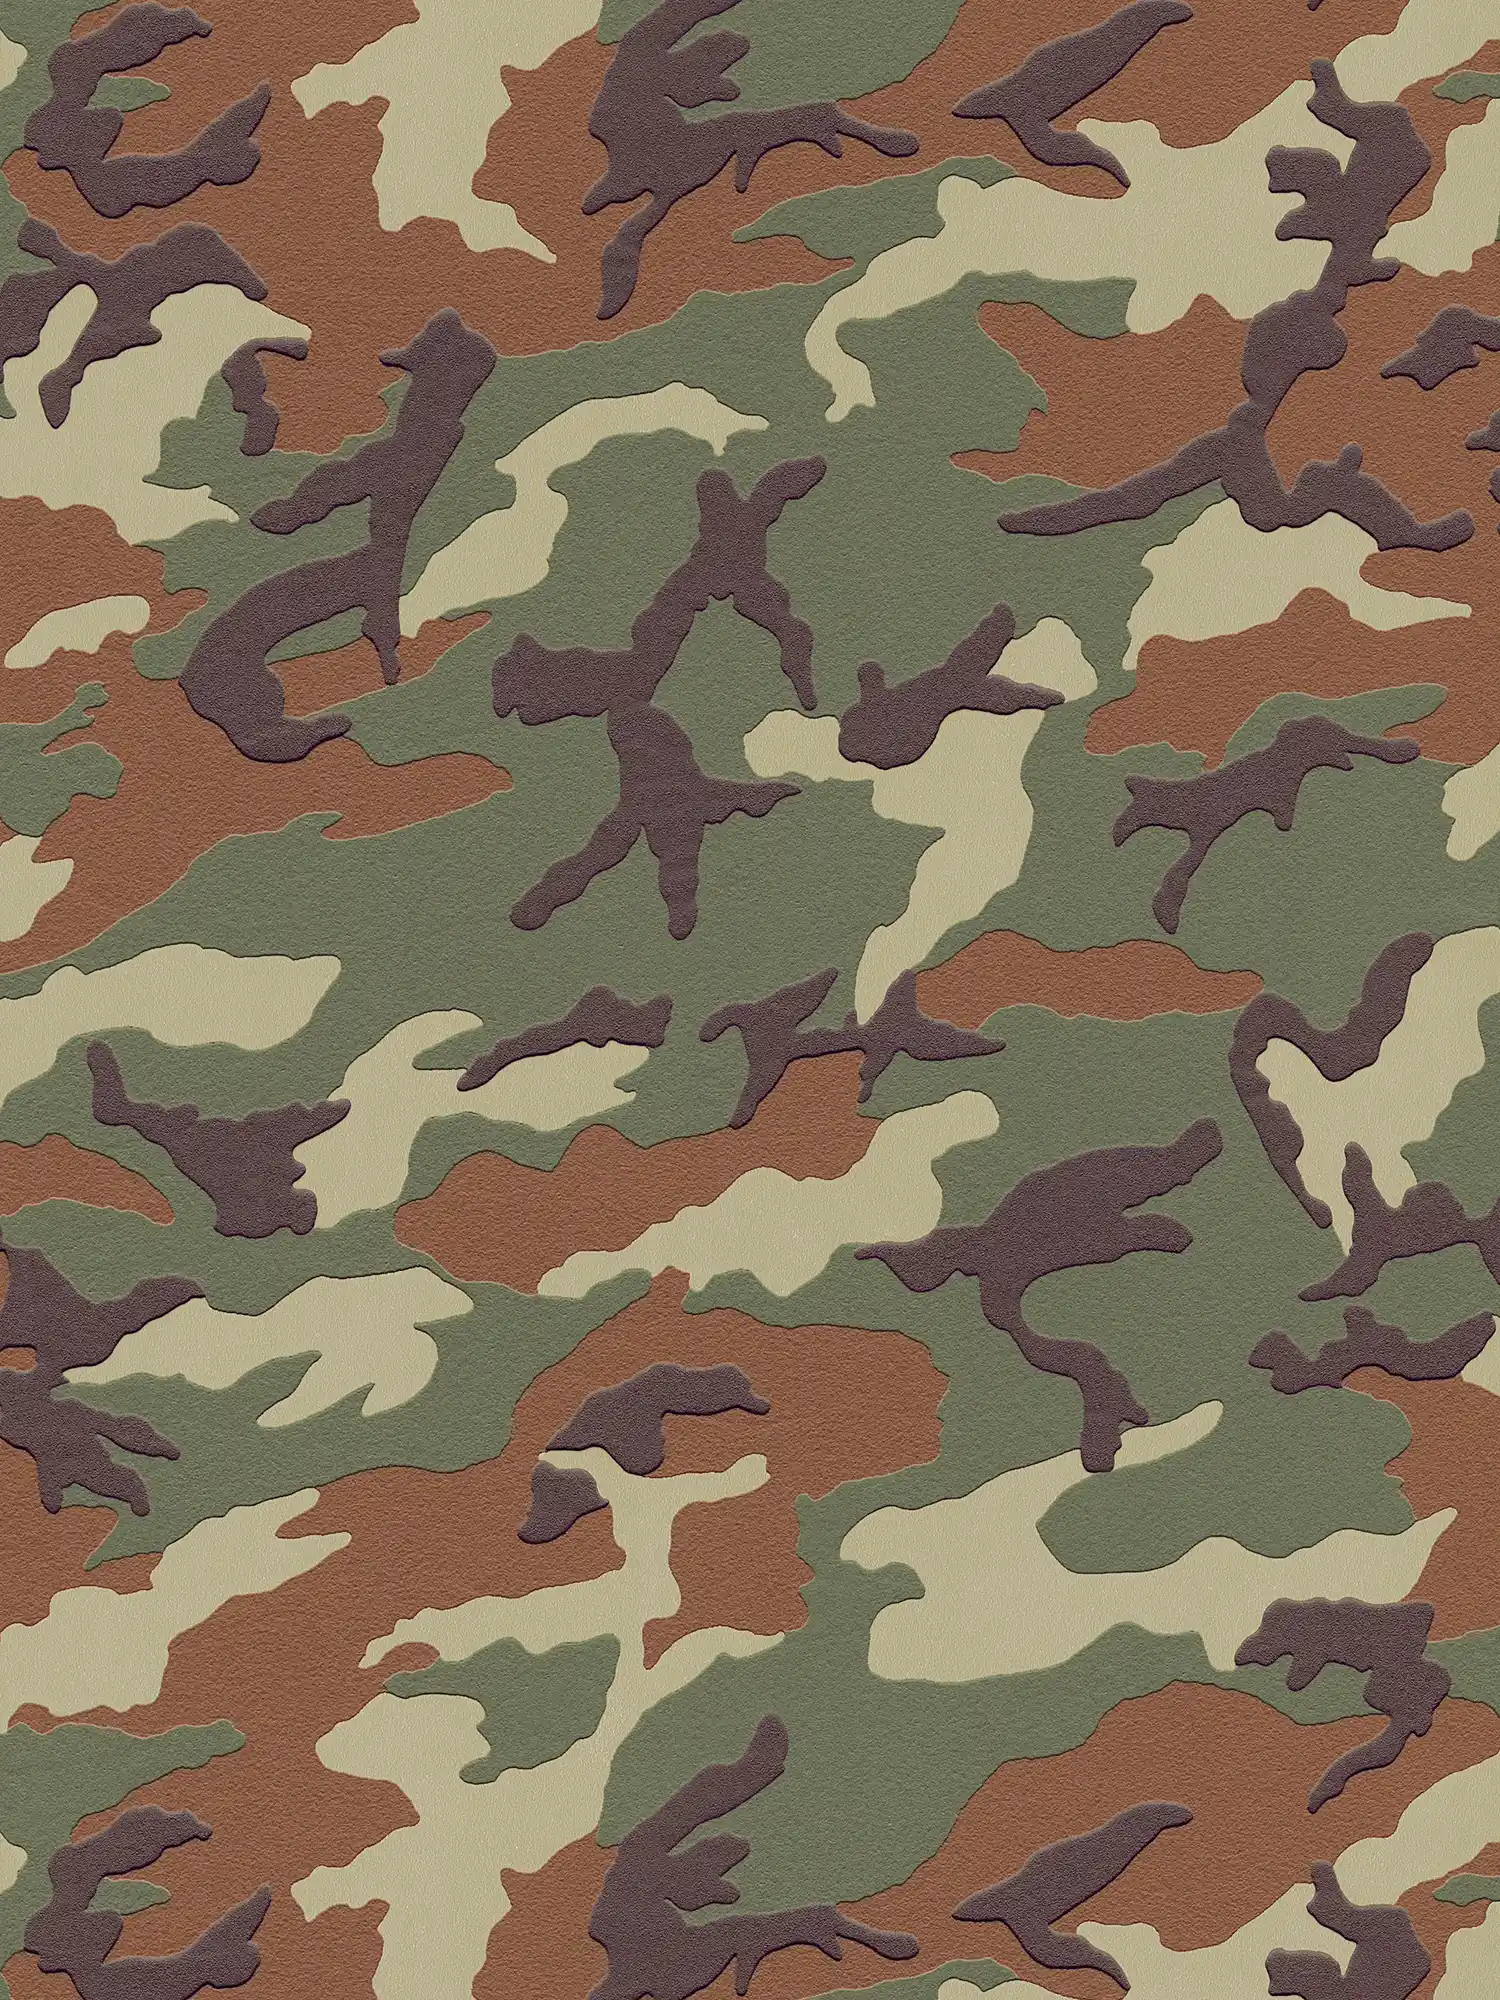         Camouflage pattern wallpaper with camouflage design - green, brown
    